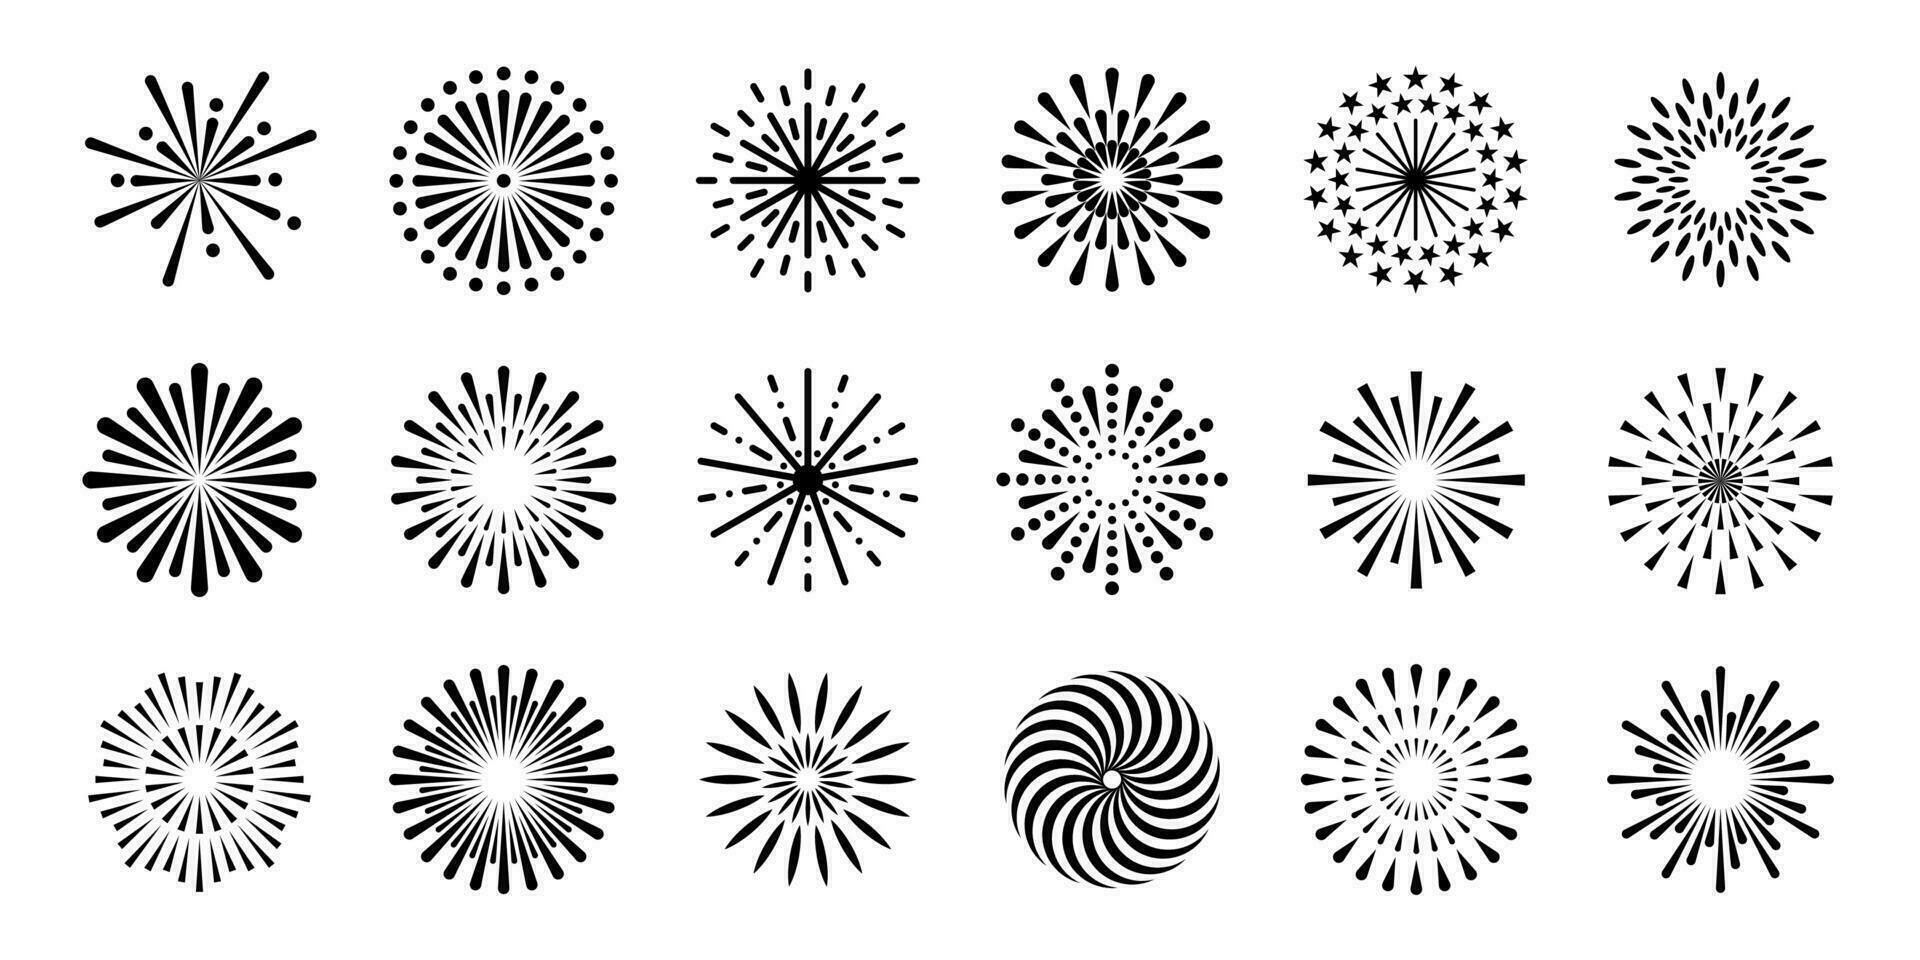 Firework. Firecrackers explosions in sky, celebration festival salute with sparkles. Christmas, Independence Day festive bursting light. Vector firework icons set